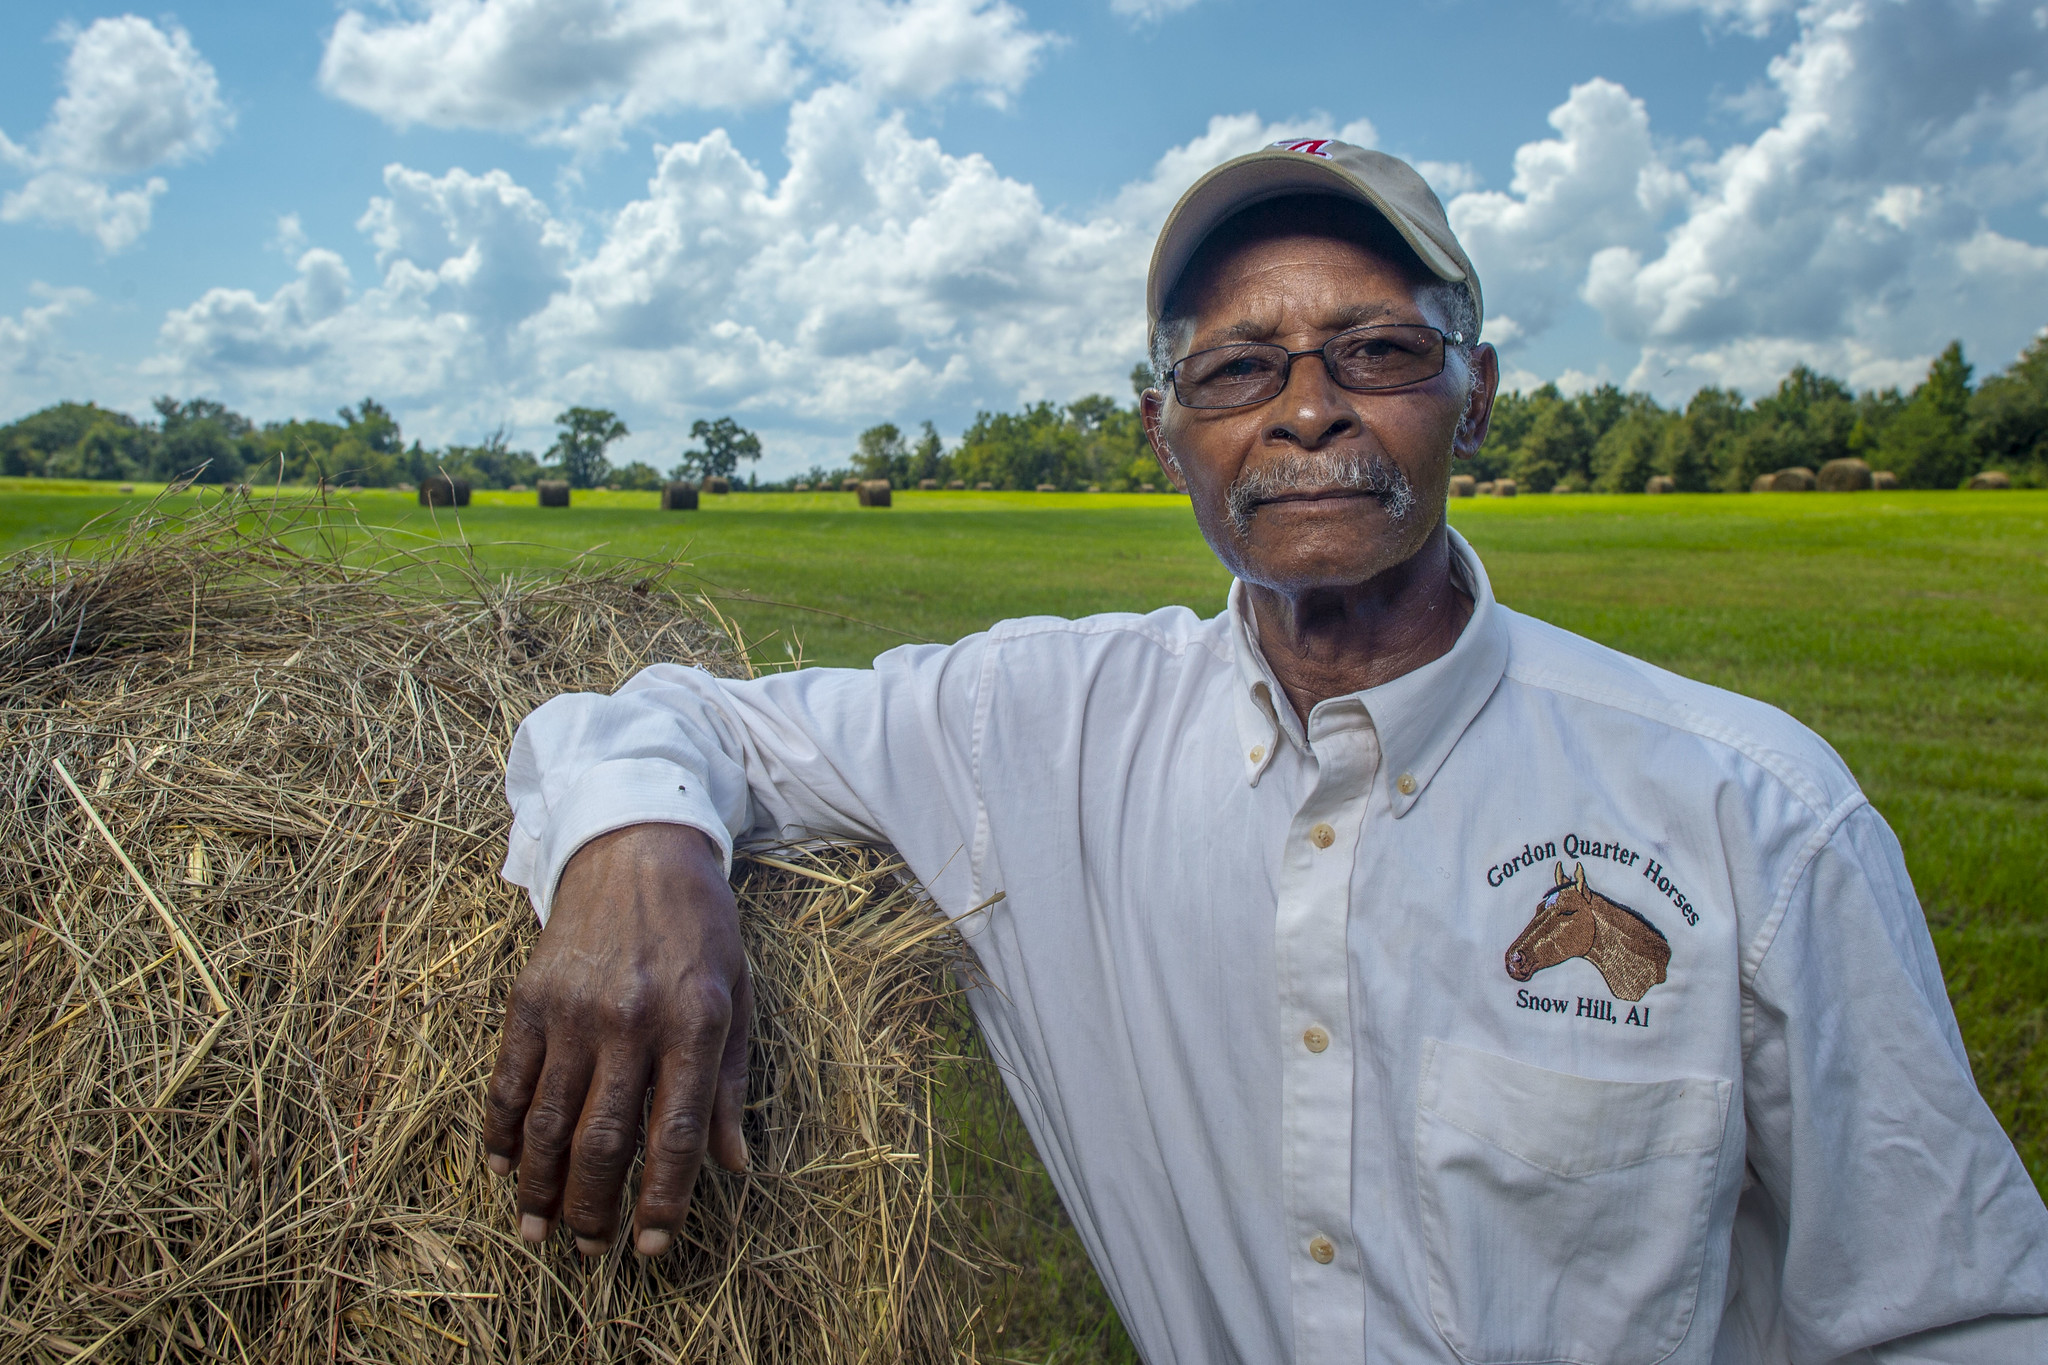 Justice for Black Farmers Act an “Important Step” Towards Racial Equity, Farmers Union Says